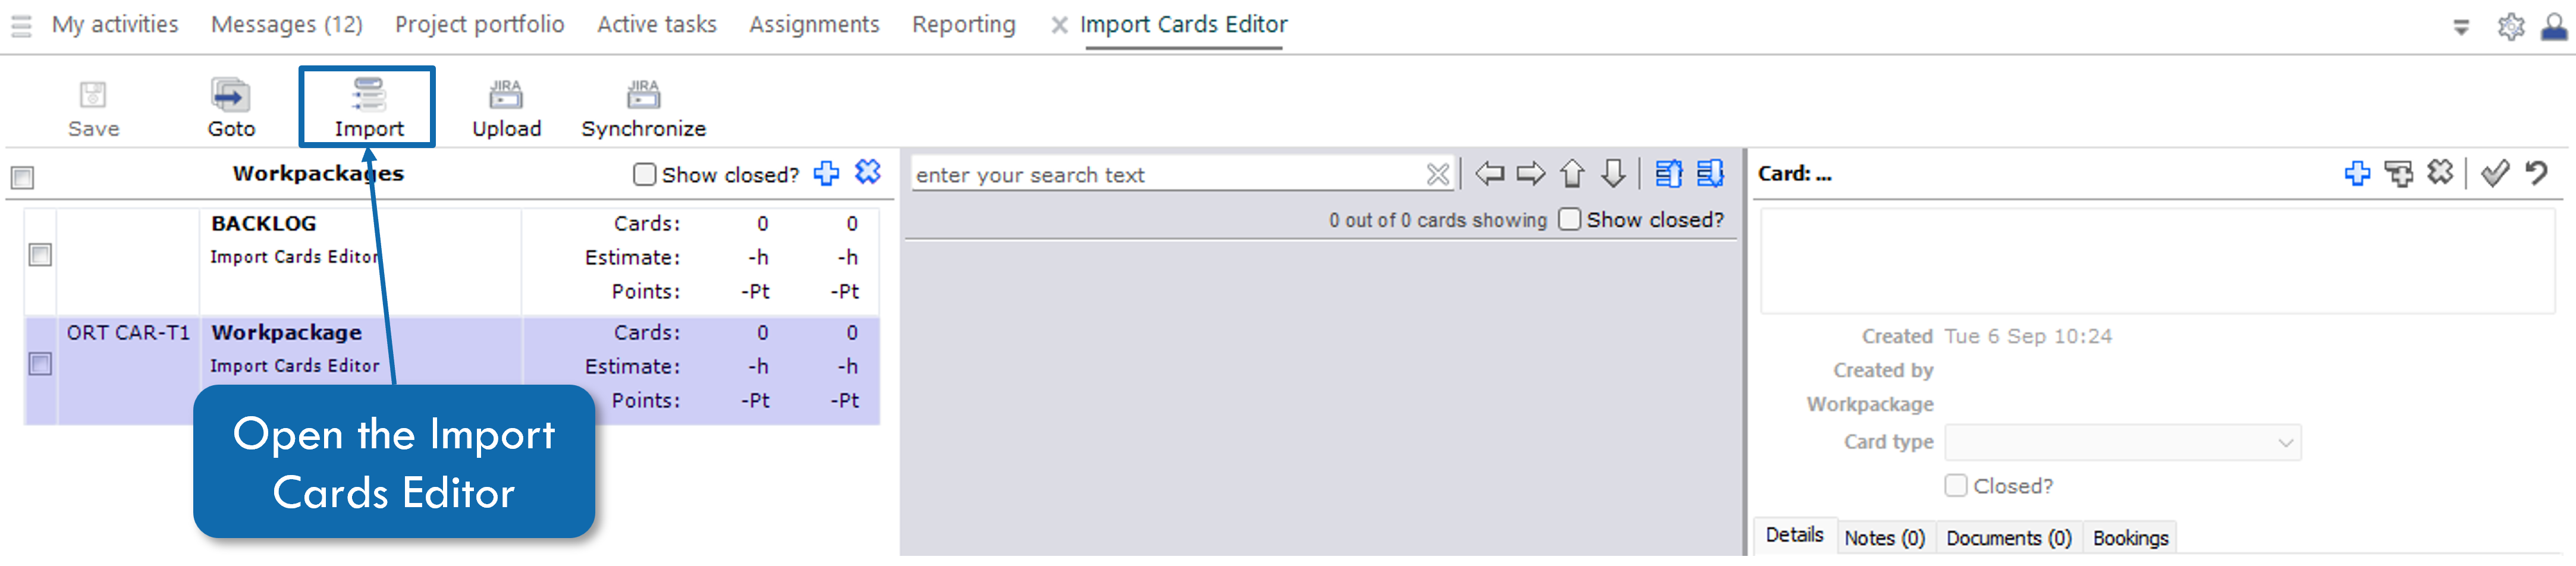 Open_Import_Cards_Editor.png